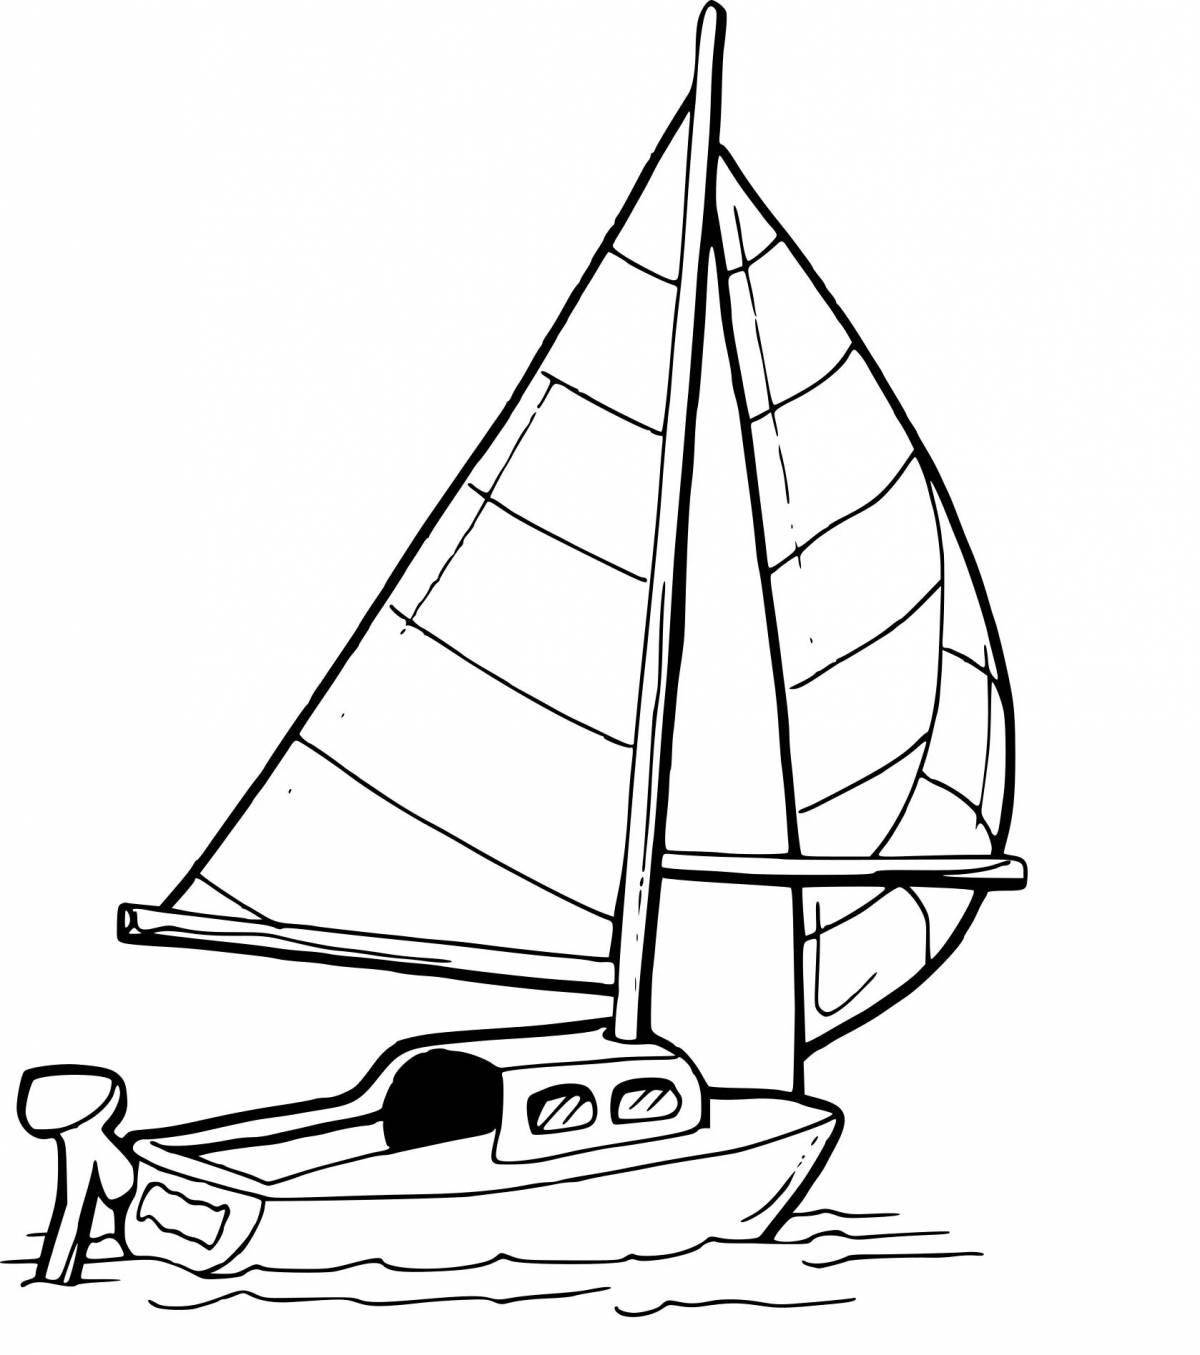 Radiant keme coloring page for kids